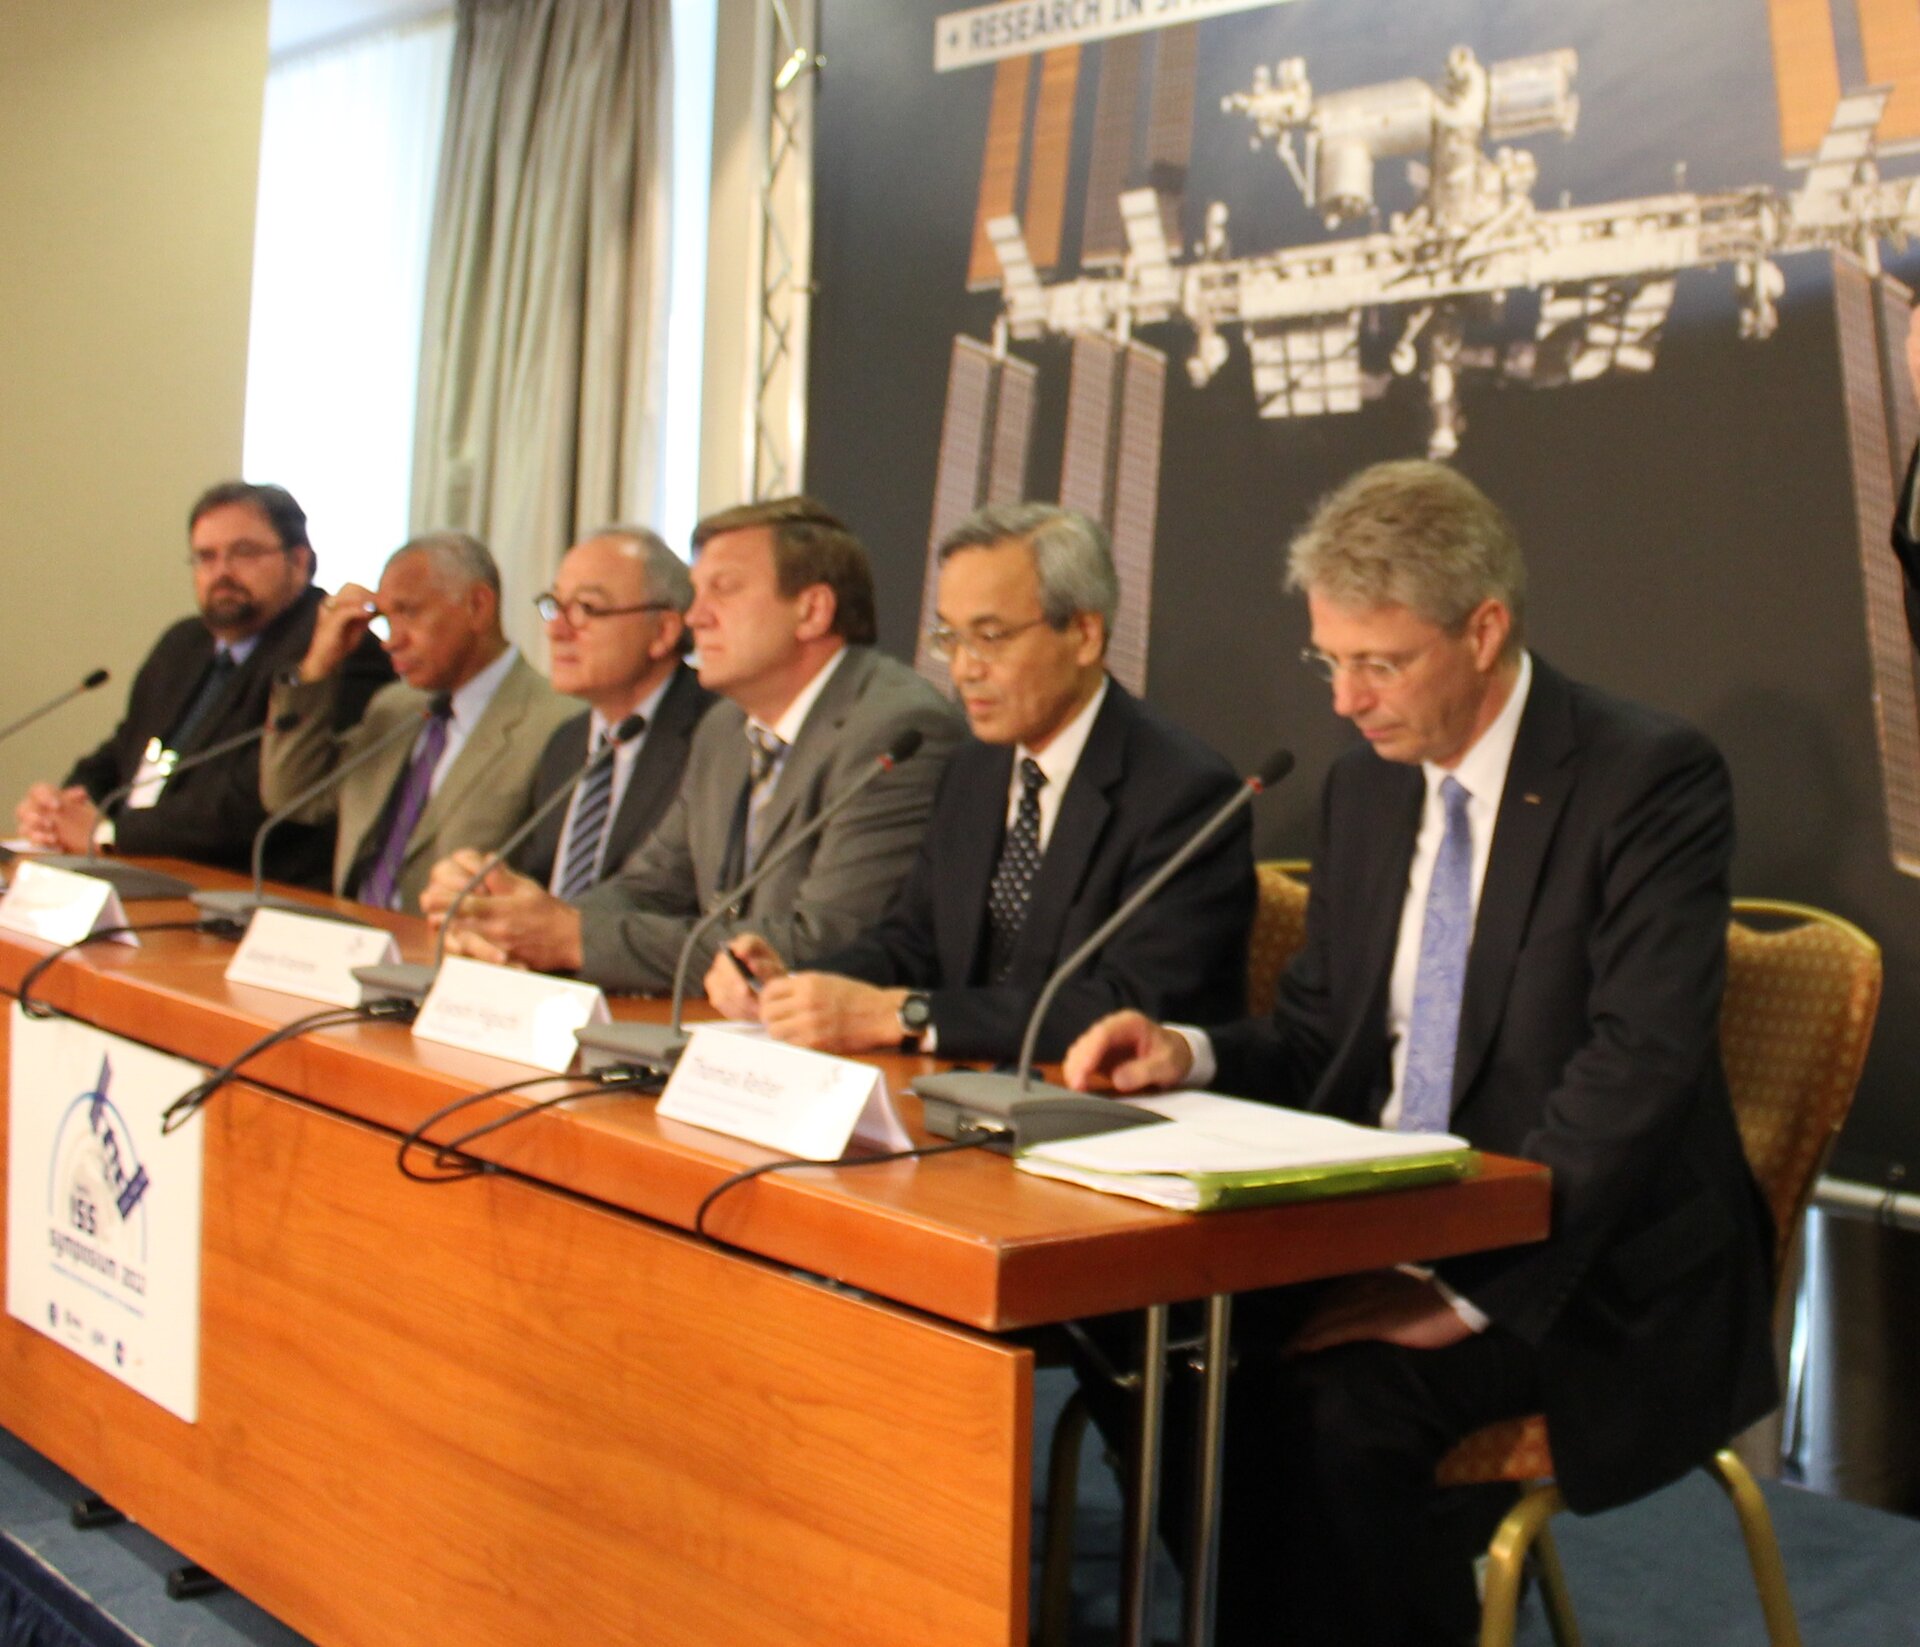 Press conference at ISS symposium 2012